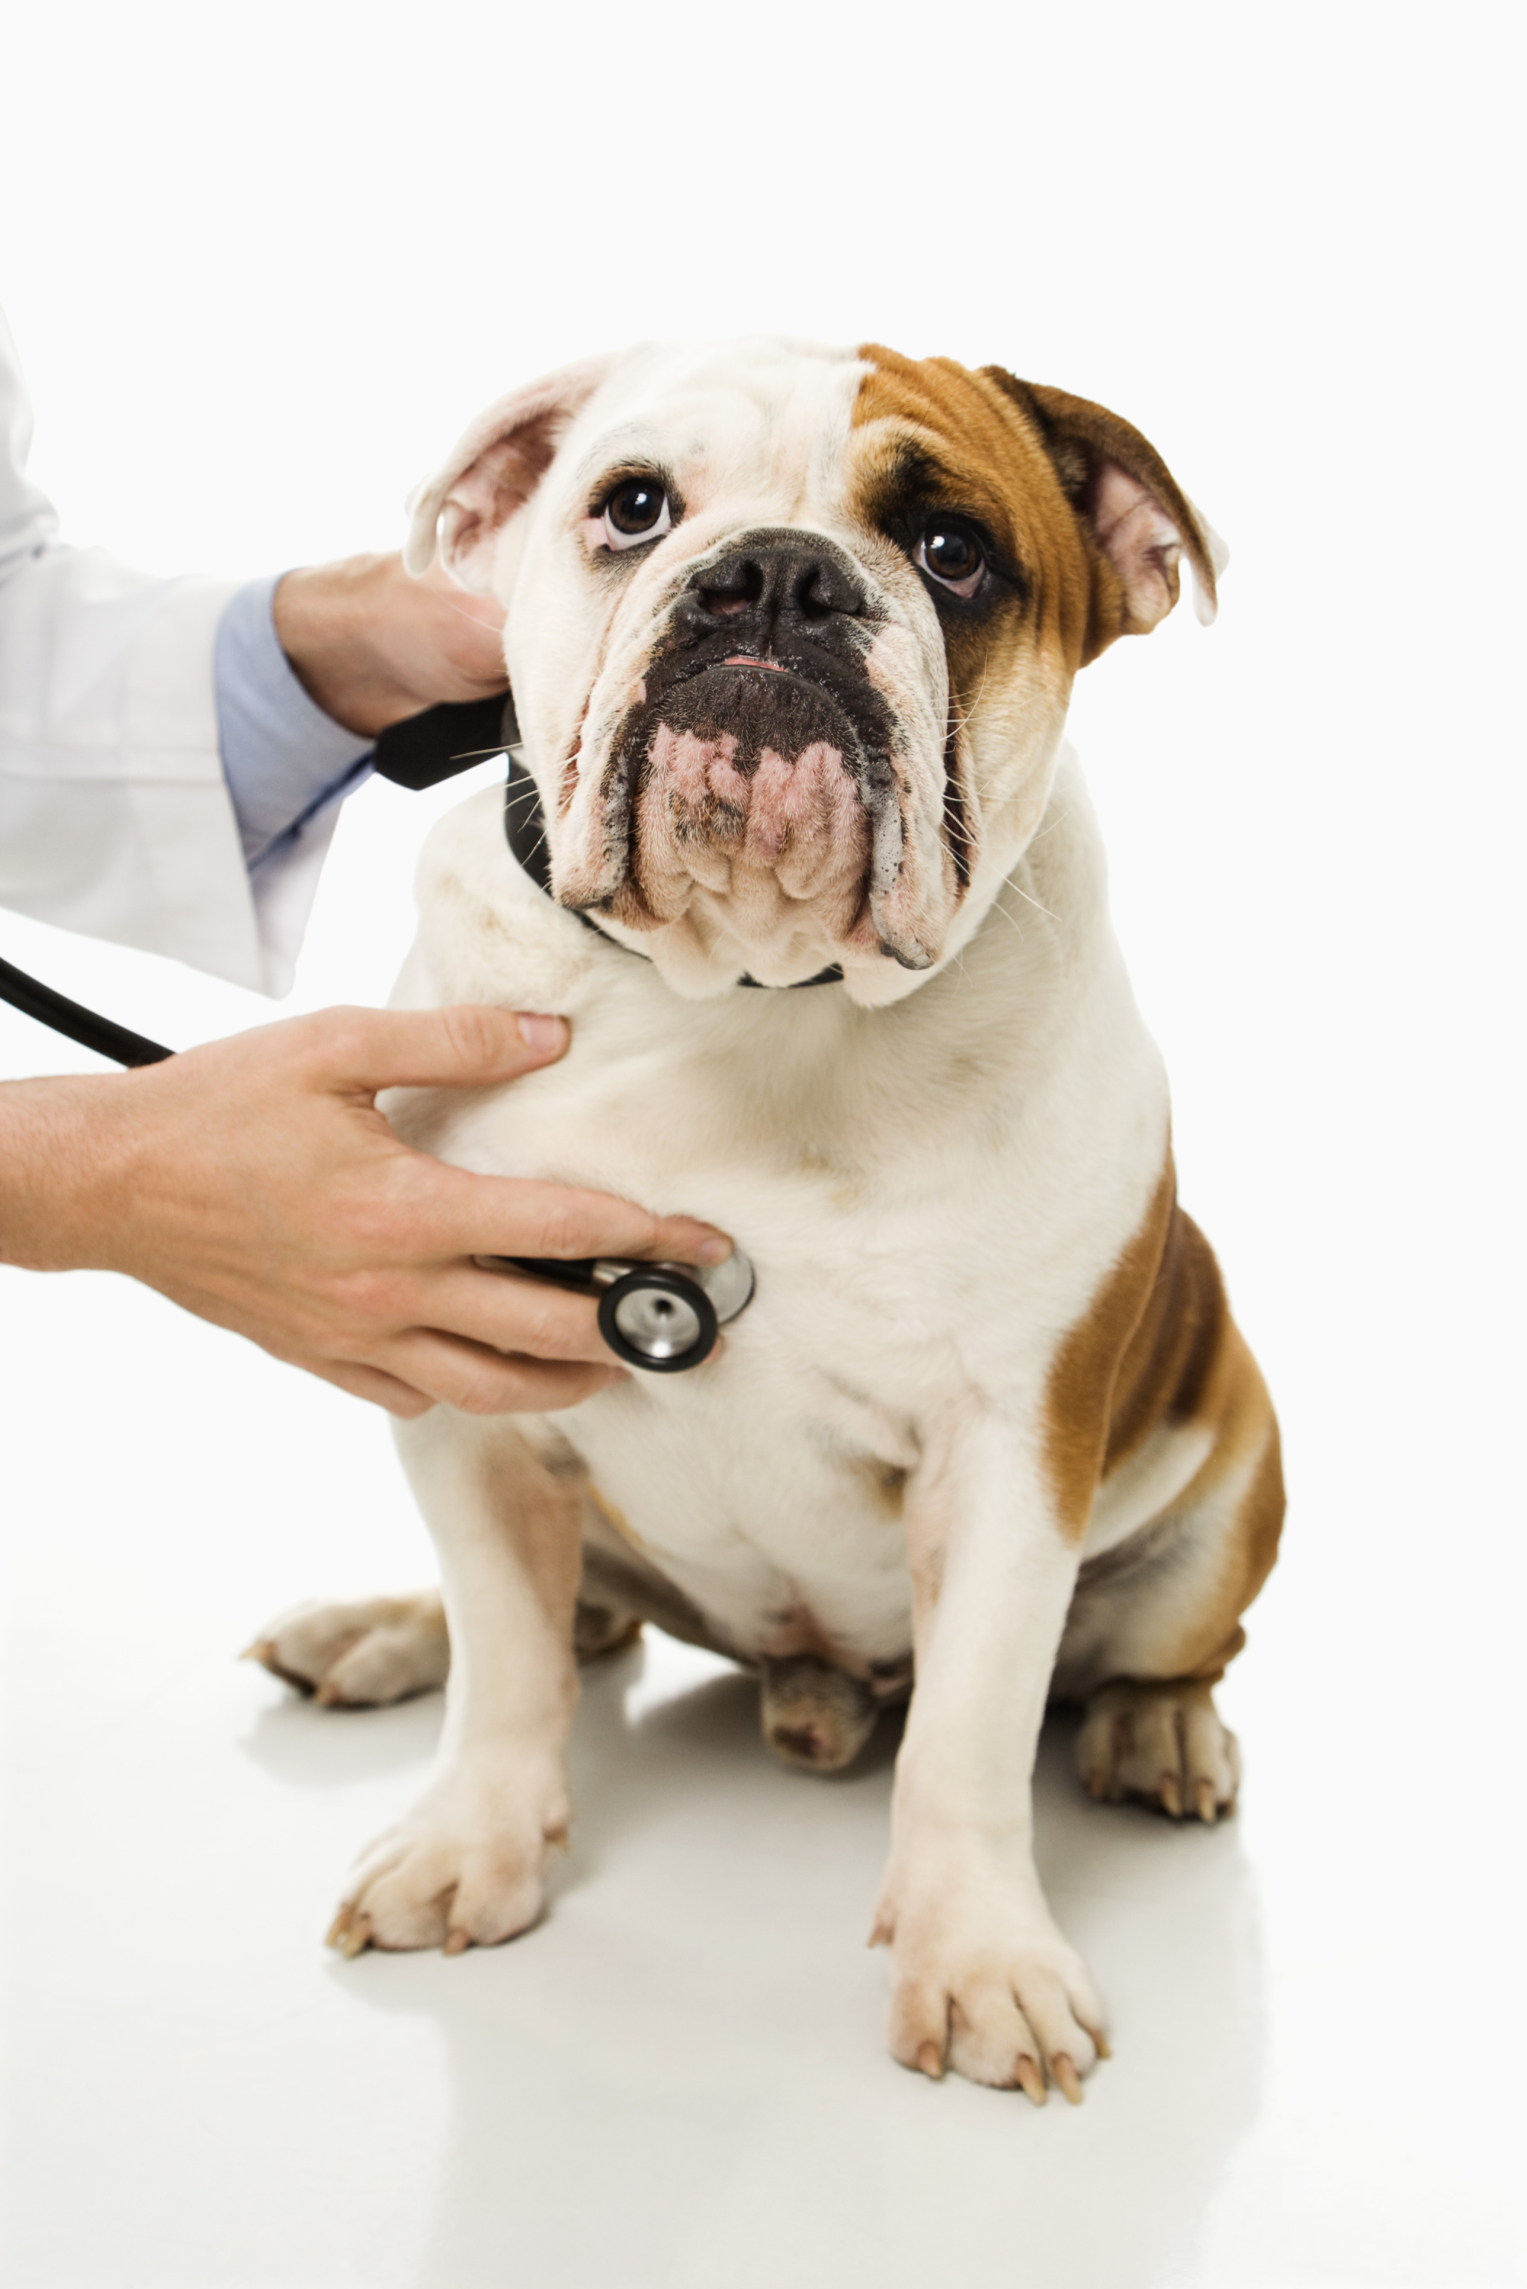 how long does it take to show signs of rabies in a dog